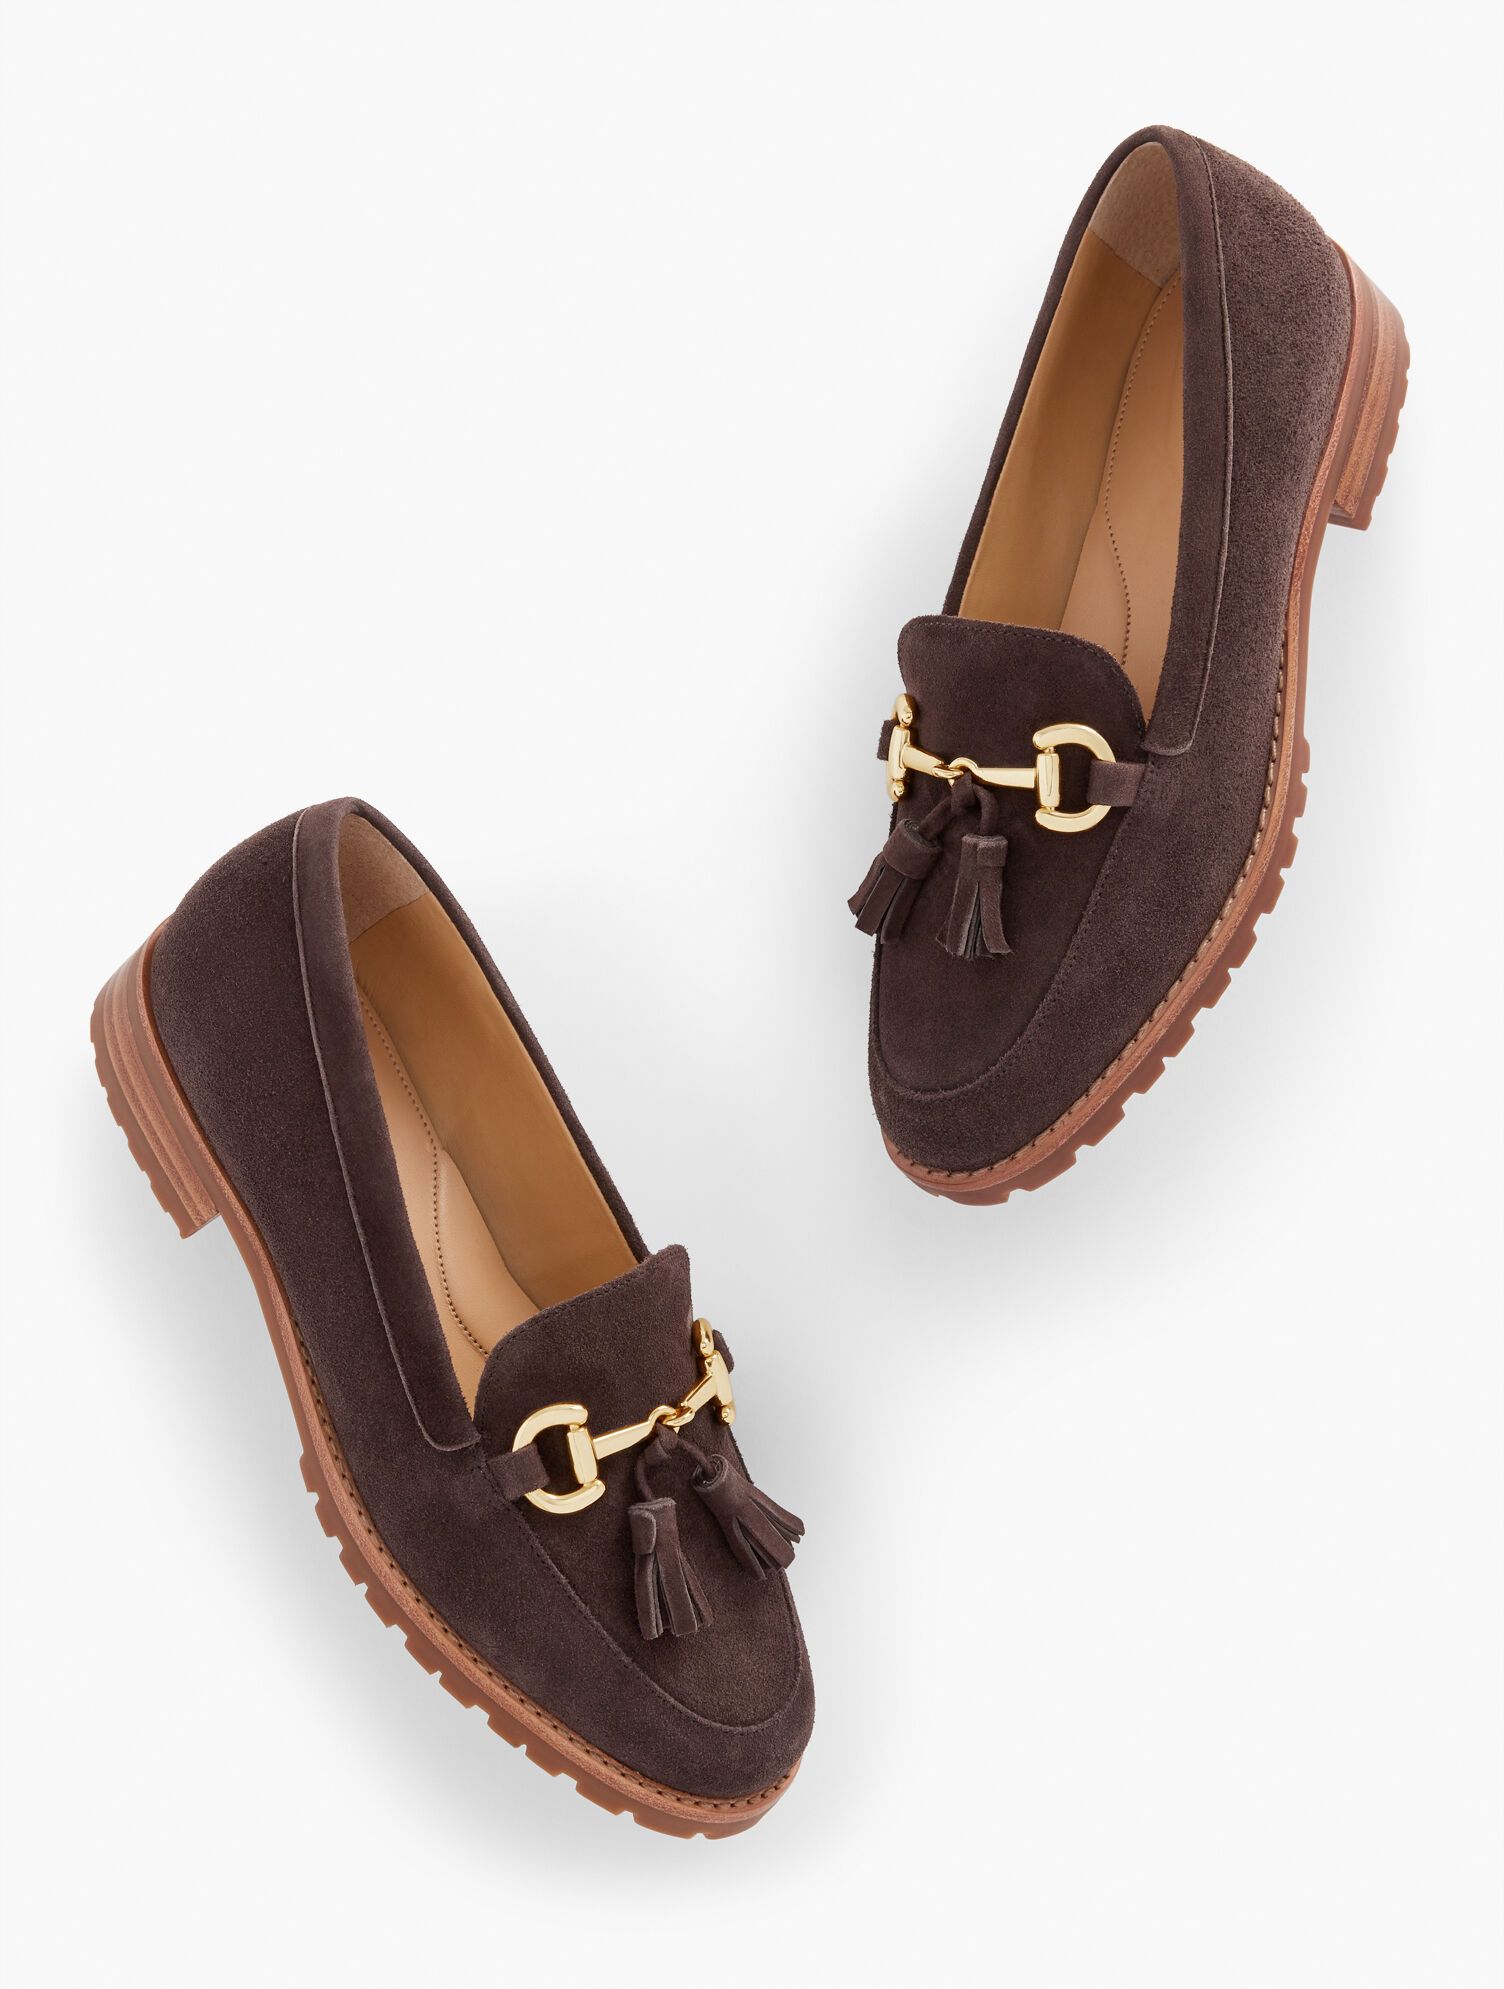 Cassidy Tassel Loafers - Suede | Talbots